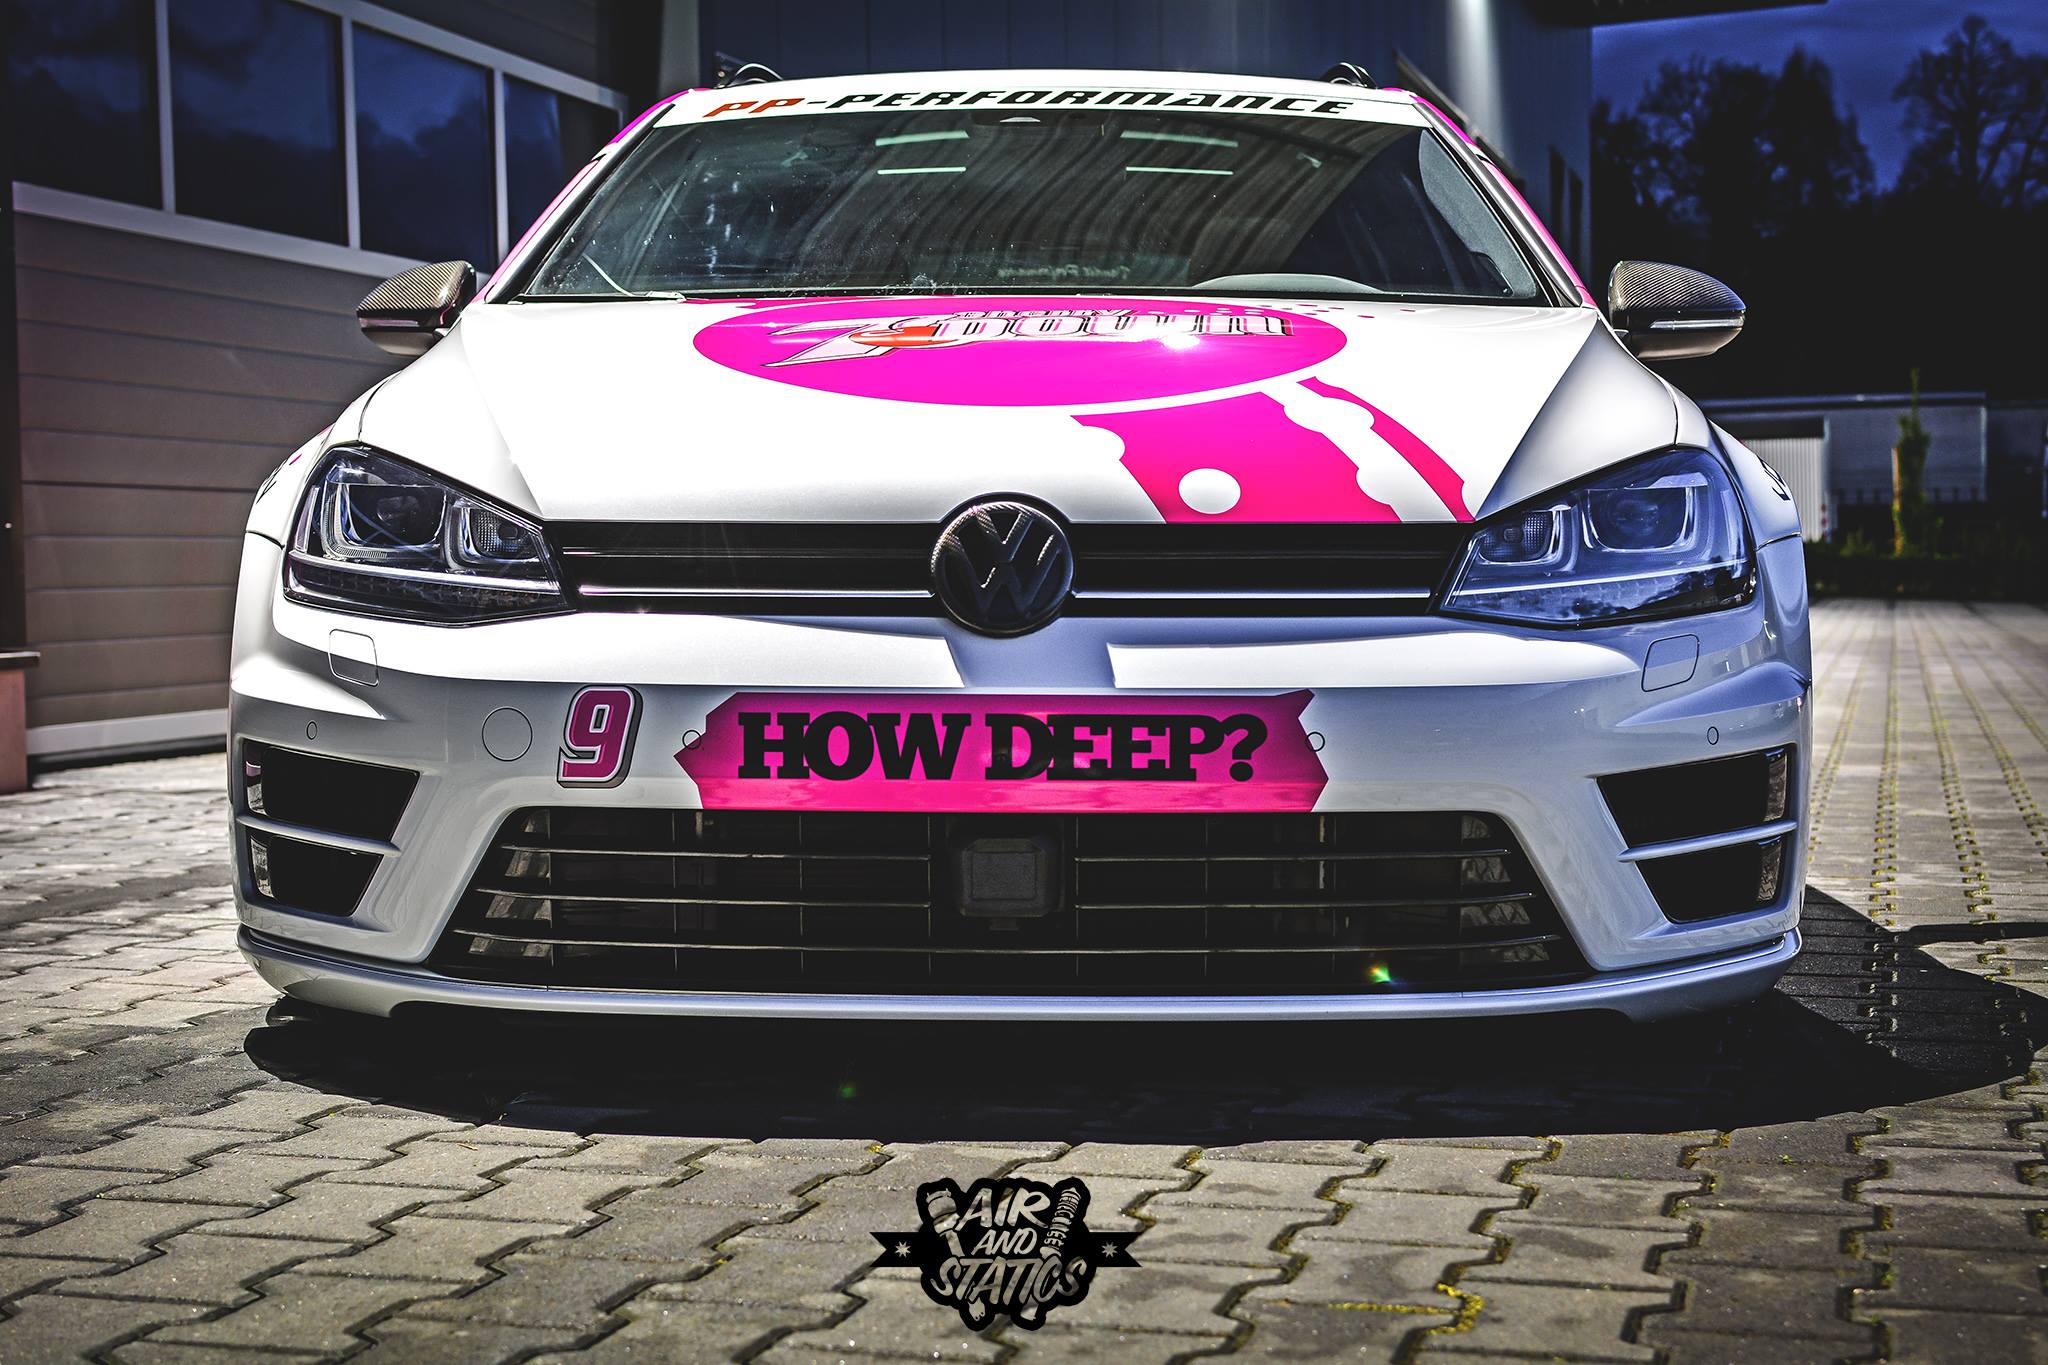 7Down 2.0 Is a Lowered Golf R Variant in Pink - autoevolution